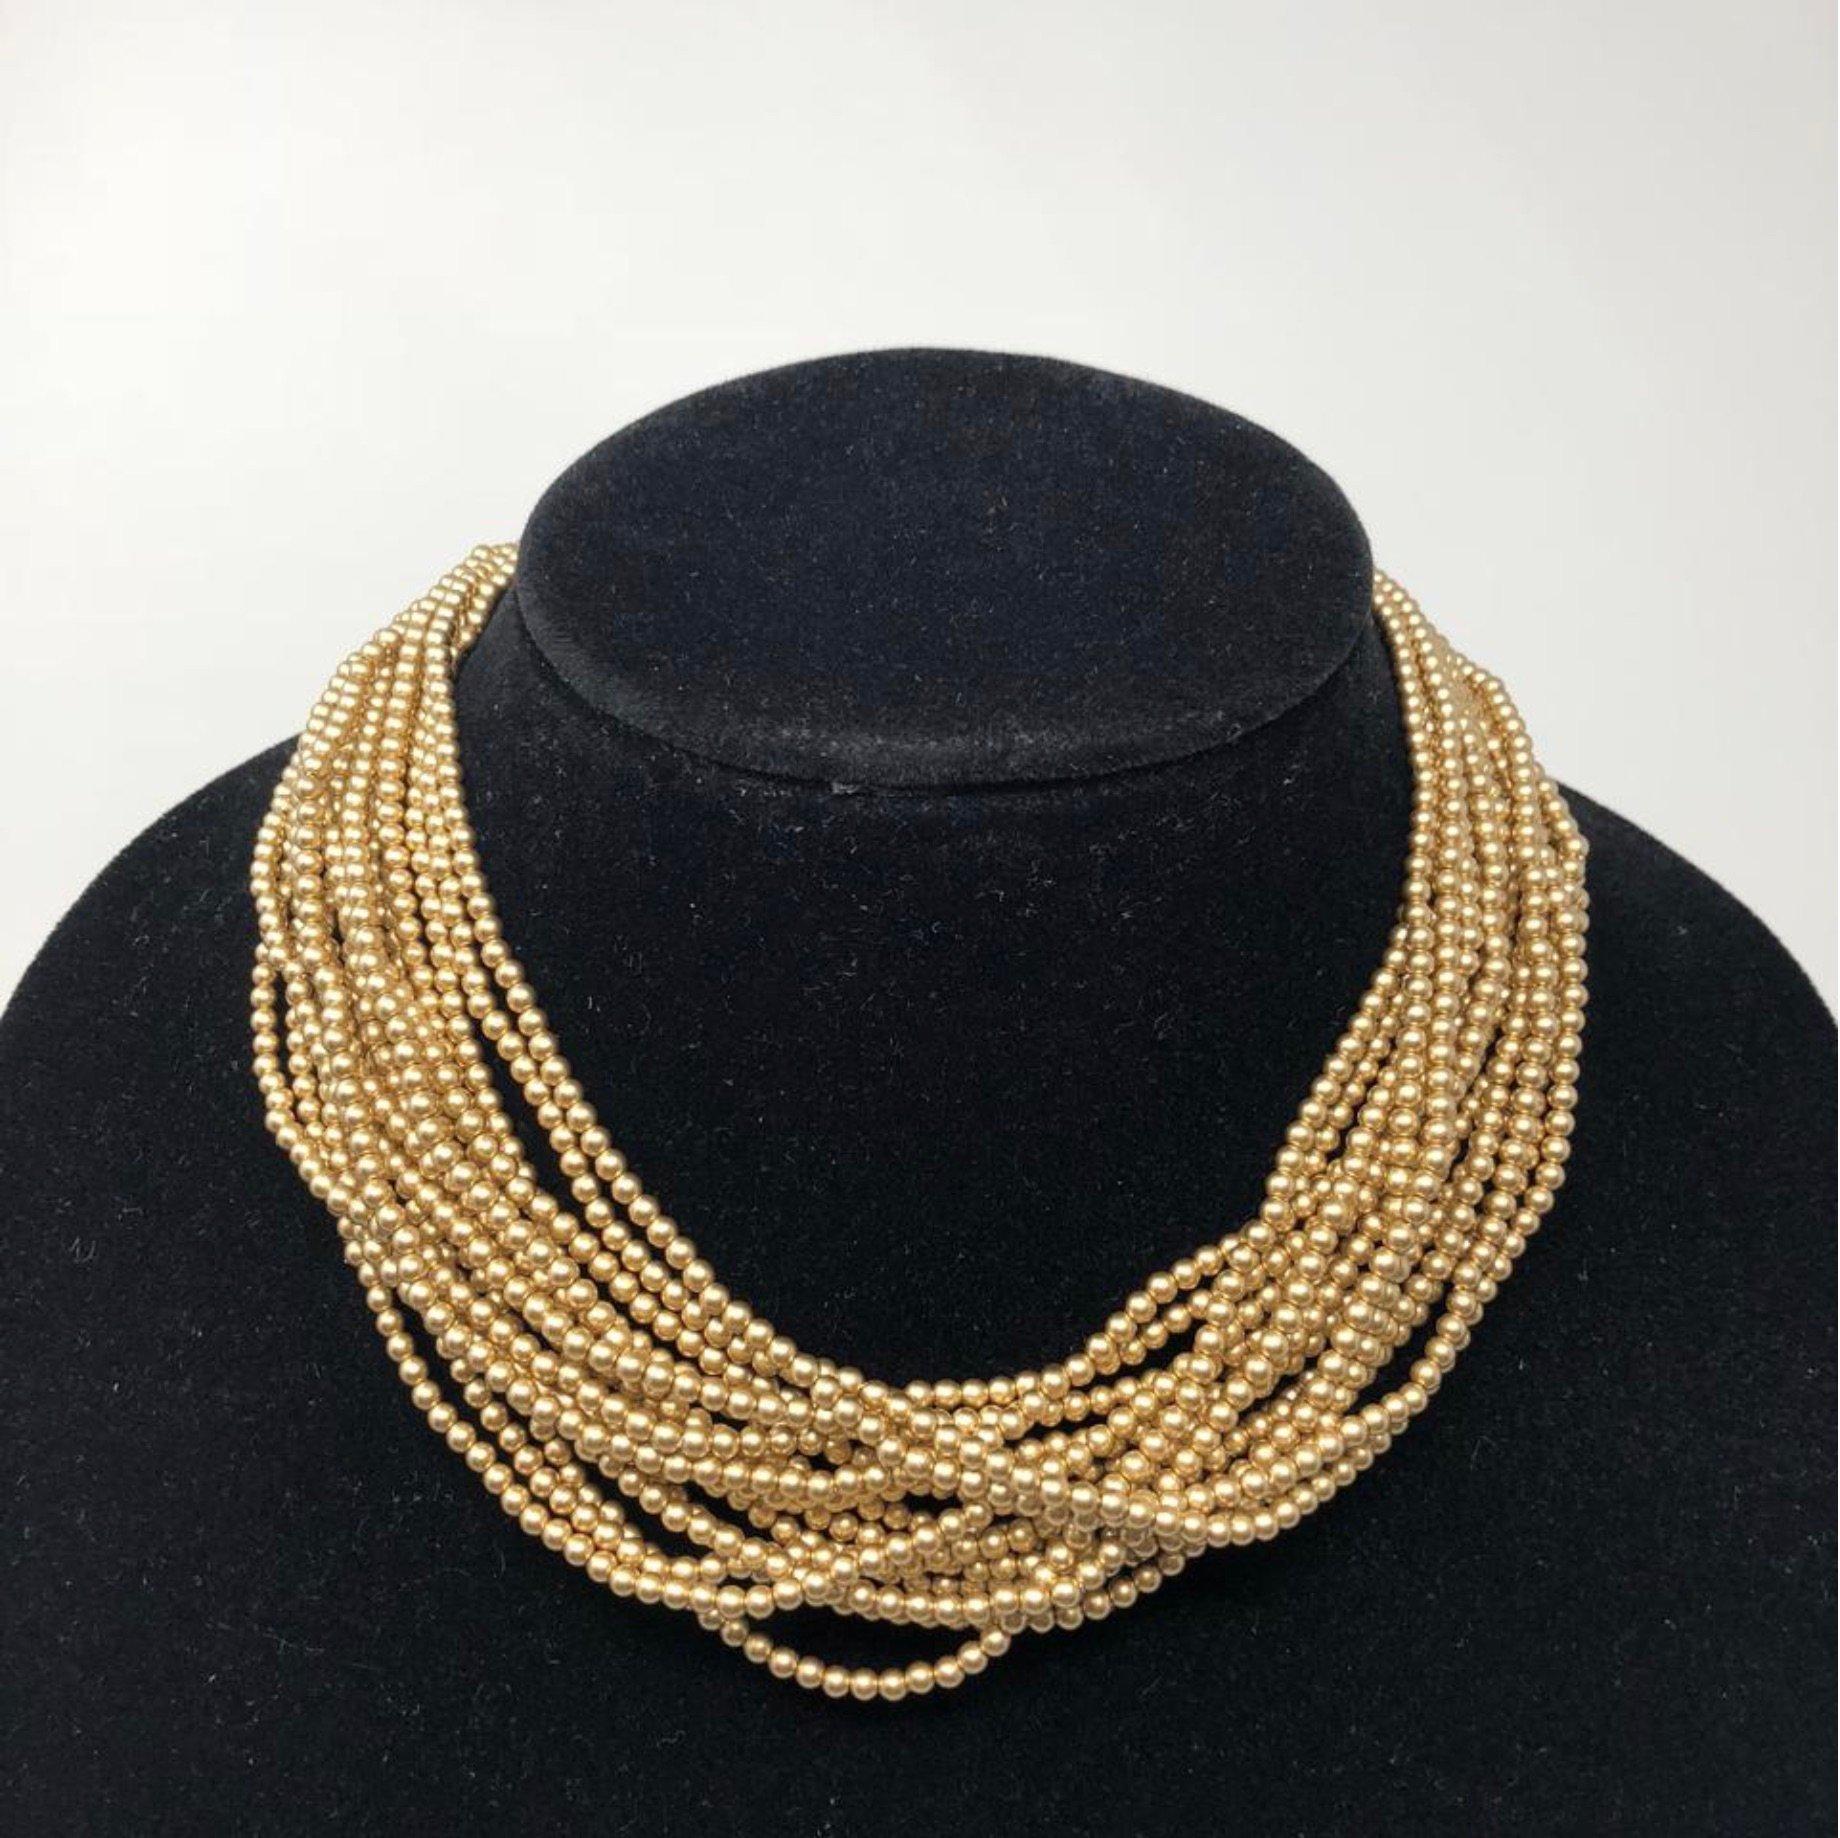 MODEL - Carolee Multistrand Mini Round Gold Choker Necklace 

CONDITION - Exceptional! No signs of wear.

SKU - 2345-FL

ORIGINAL RETAIL PRICE - 275 + tax

MATERIAL - Mixed Metal with Gold Plating

WEIGHT - NA

DIMENSIONS - 16 inch

COMES WITH - No